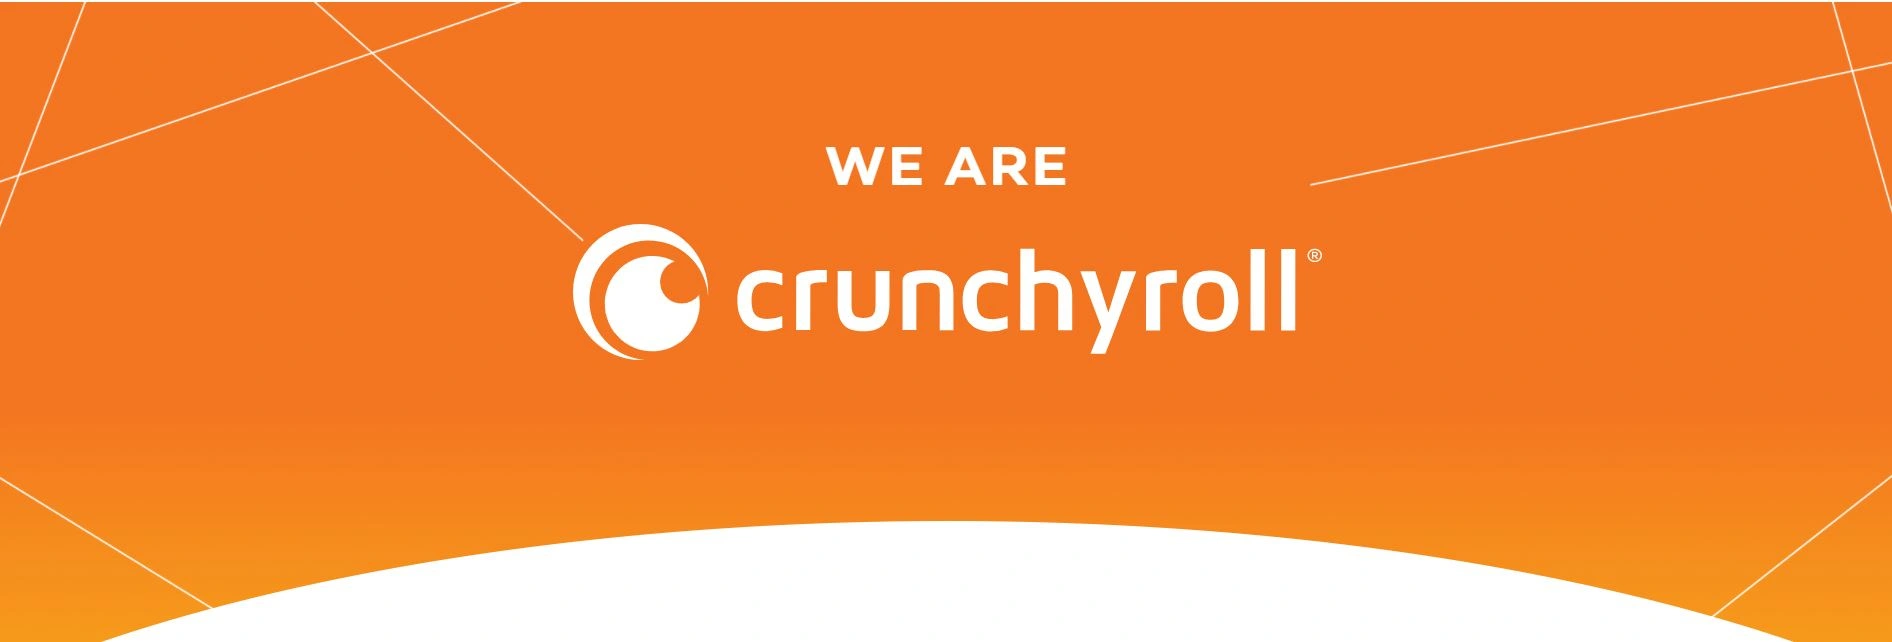 Crunchyroll about page